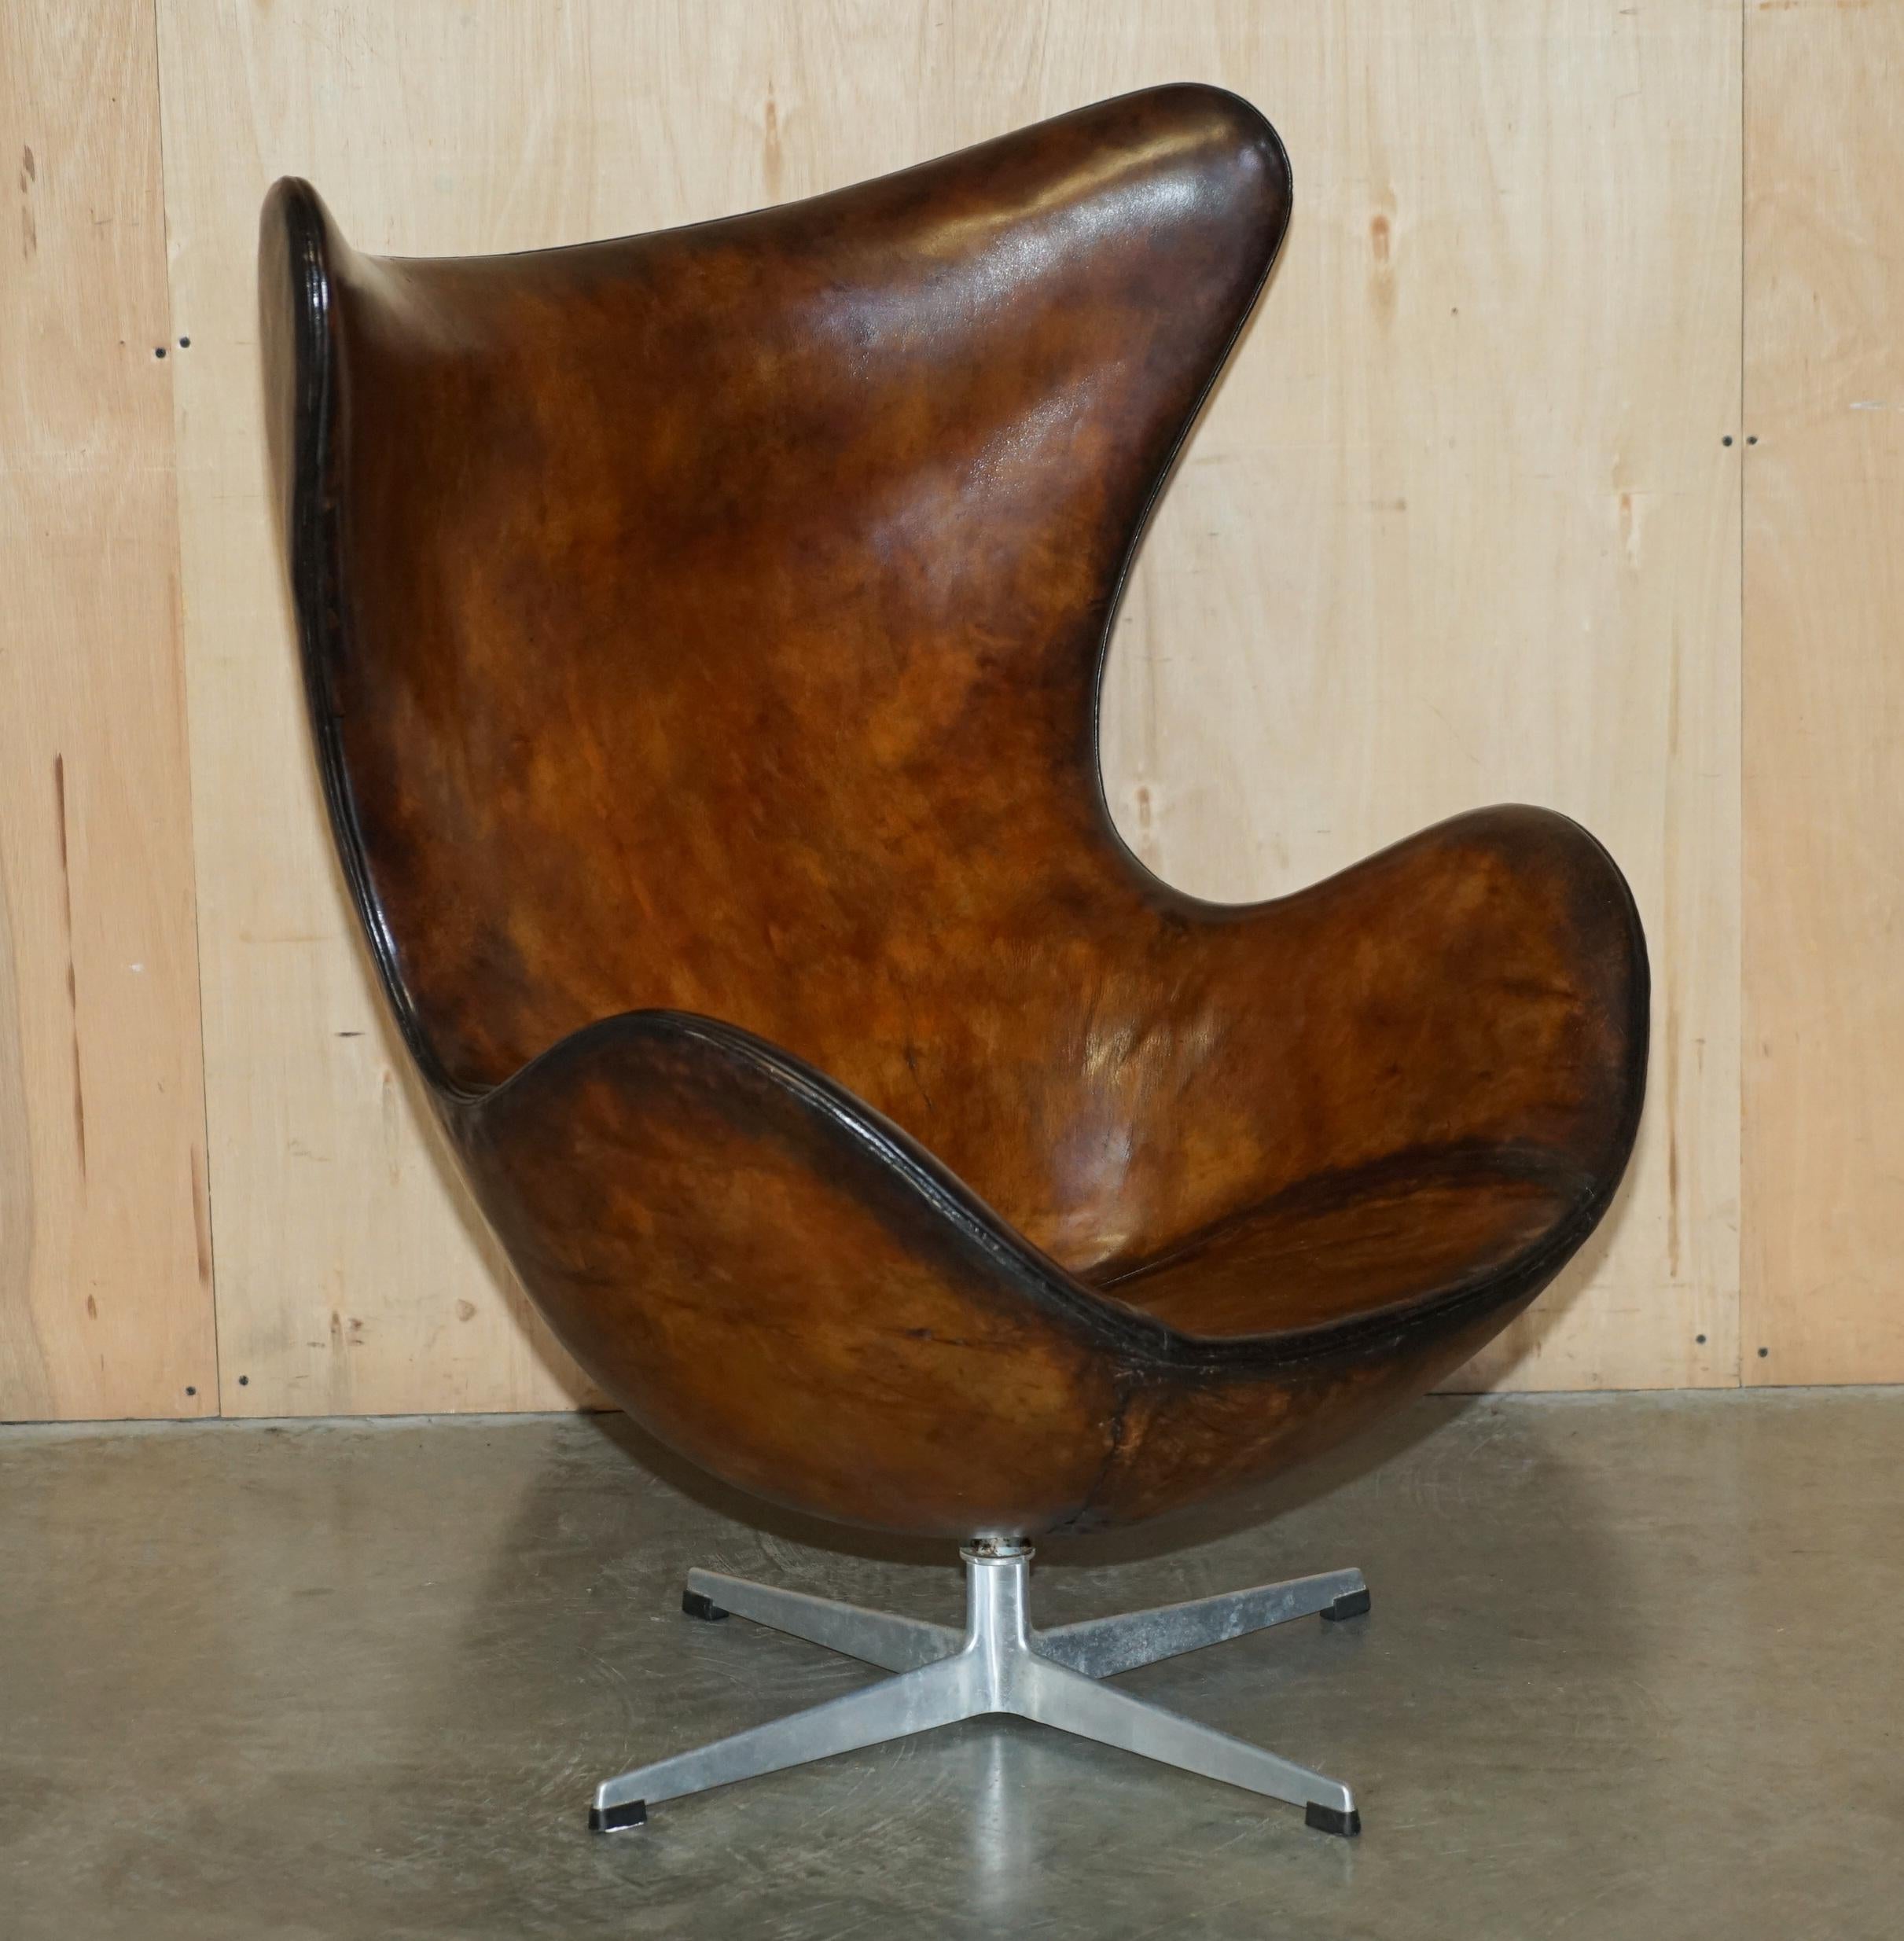 Royal House Antiques

Royal House Antiques is delighted to offer for sale this very significant, original fully stamped 1965 Fritz Hansen, completely restored egg chair with matching footstool

Please note the delivery fee listed is just a guide, it